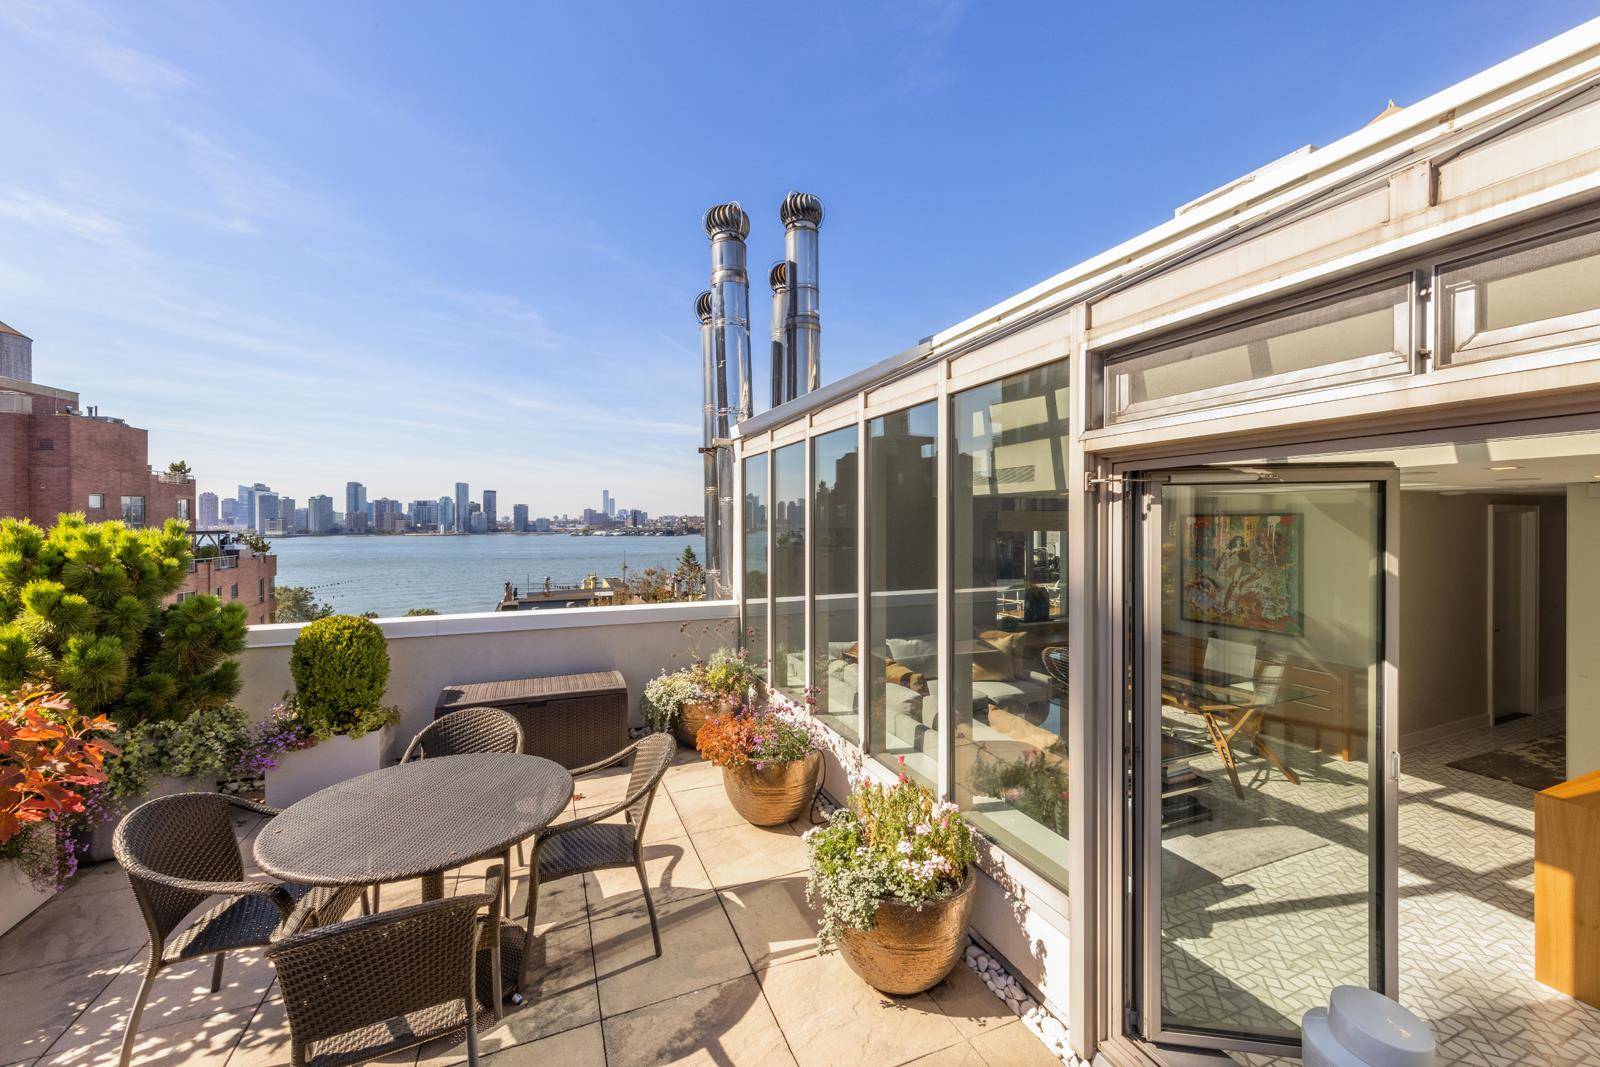 Rare, just renovated duplex penthouse home with three private outdoor spaces and 360 degree views of the Hudson River and city skyline in 359 West 11th Street, a boutique full ...